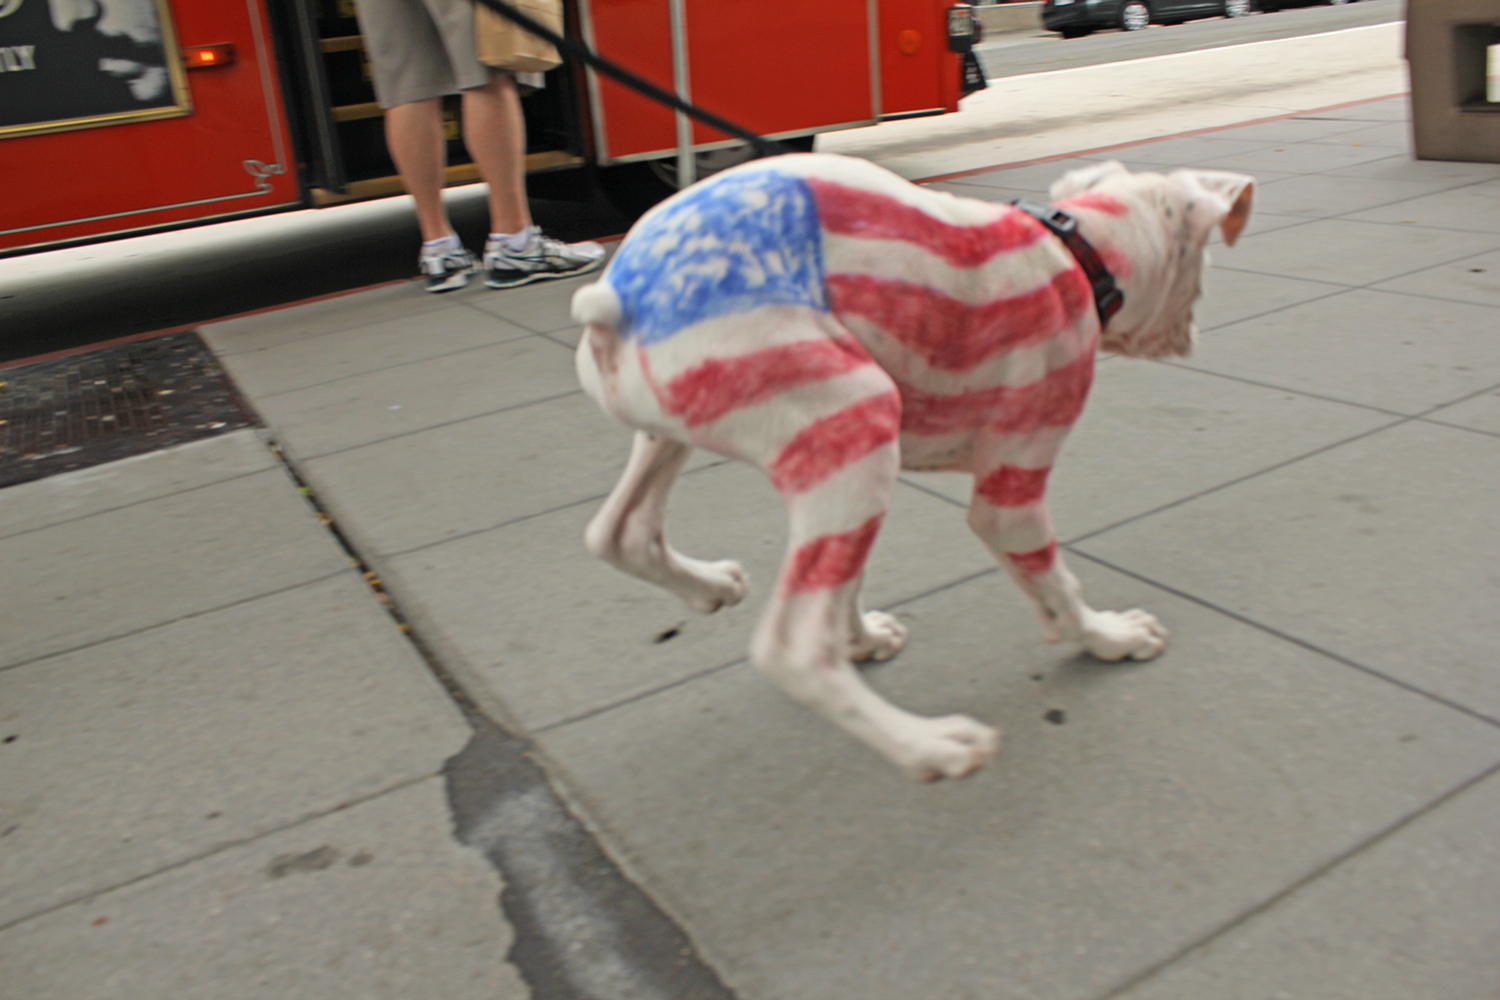    THE DOG’S OWNER PAINTED A FLAG ON THIS DOG TO CELEBRATE THE 4TH OF JULY... HE WAS HAVING SUCH A GOOD TIME ON HIS WALK THAT HE WALKED WITH A SPRING IN HIS STEP.   